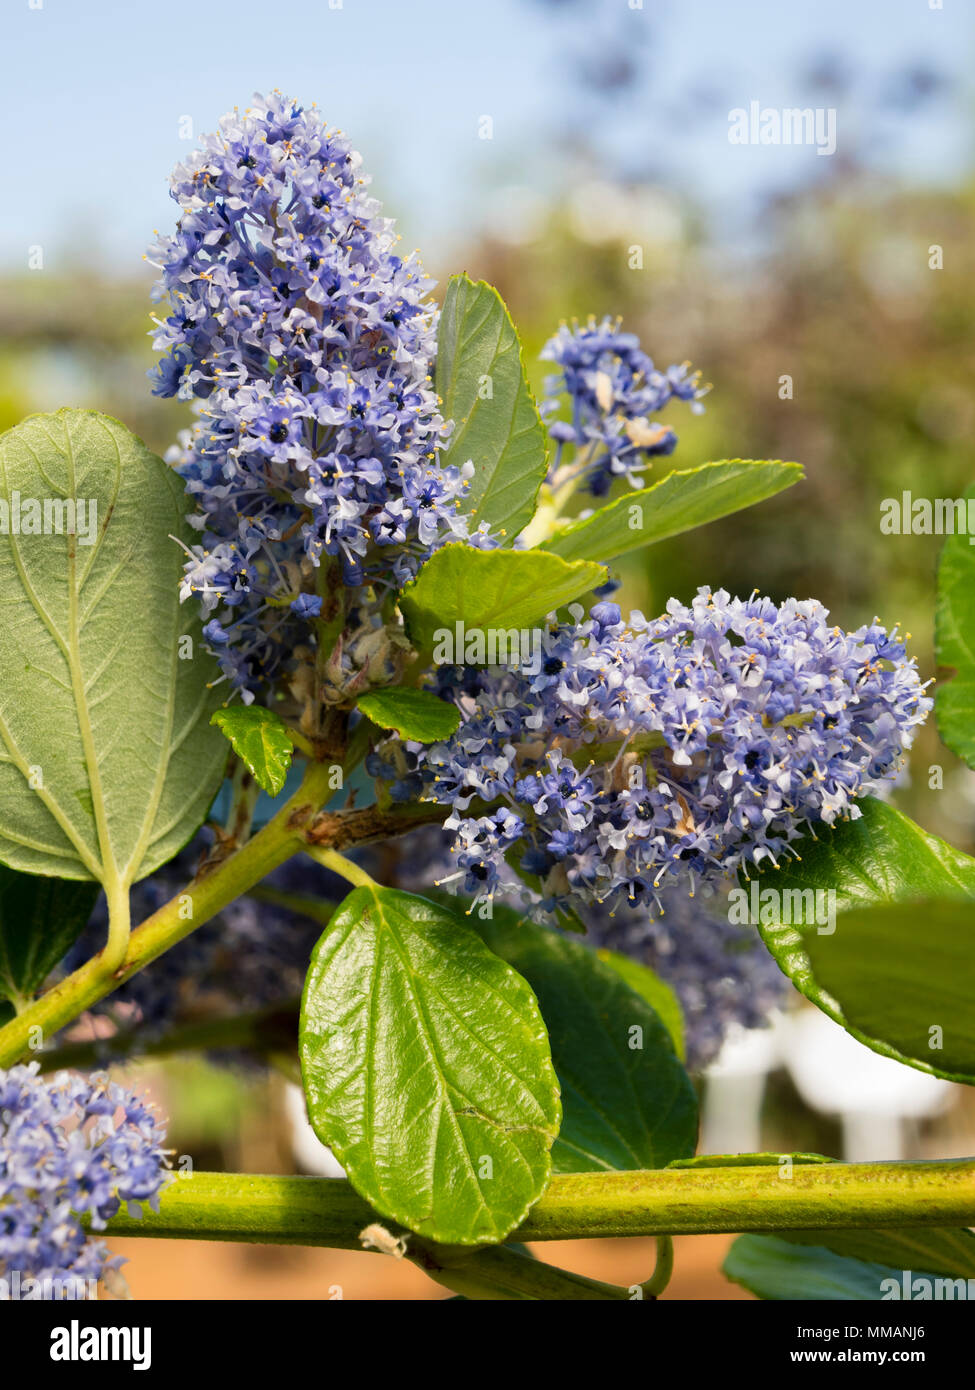 Densely packed blue flowers in the heads of the Californian lilac, Ceanothus arboreus 'Trewithen Blue' Stock Photo